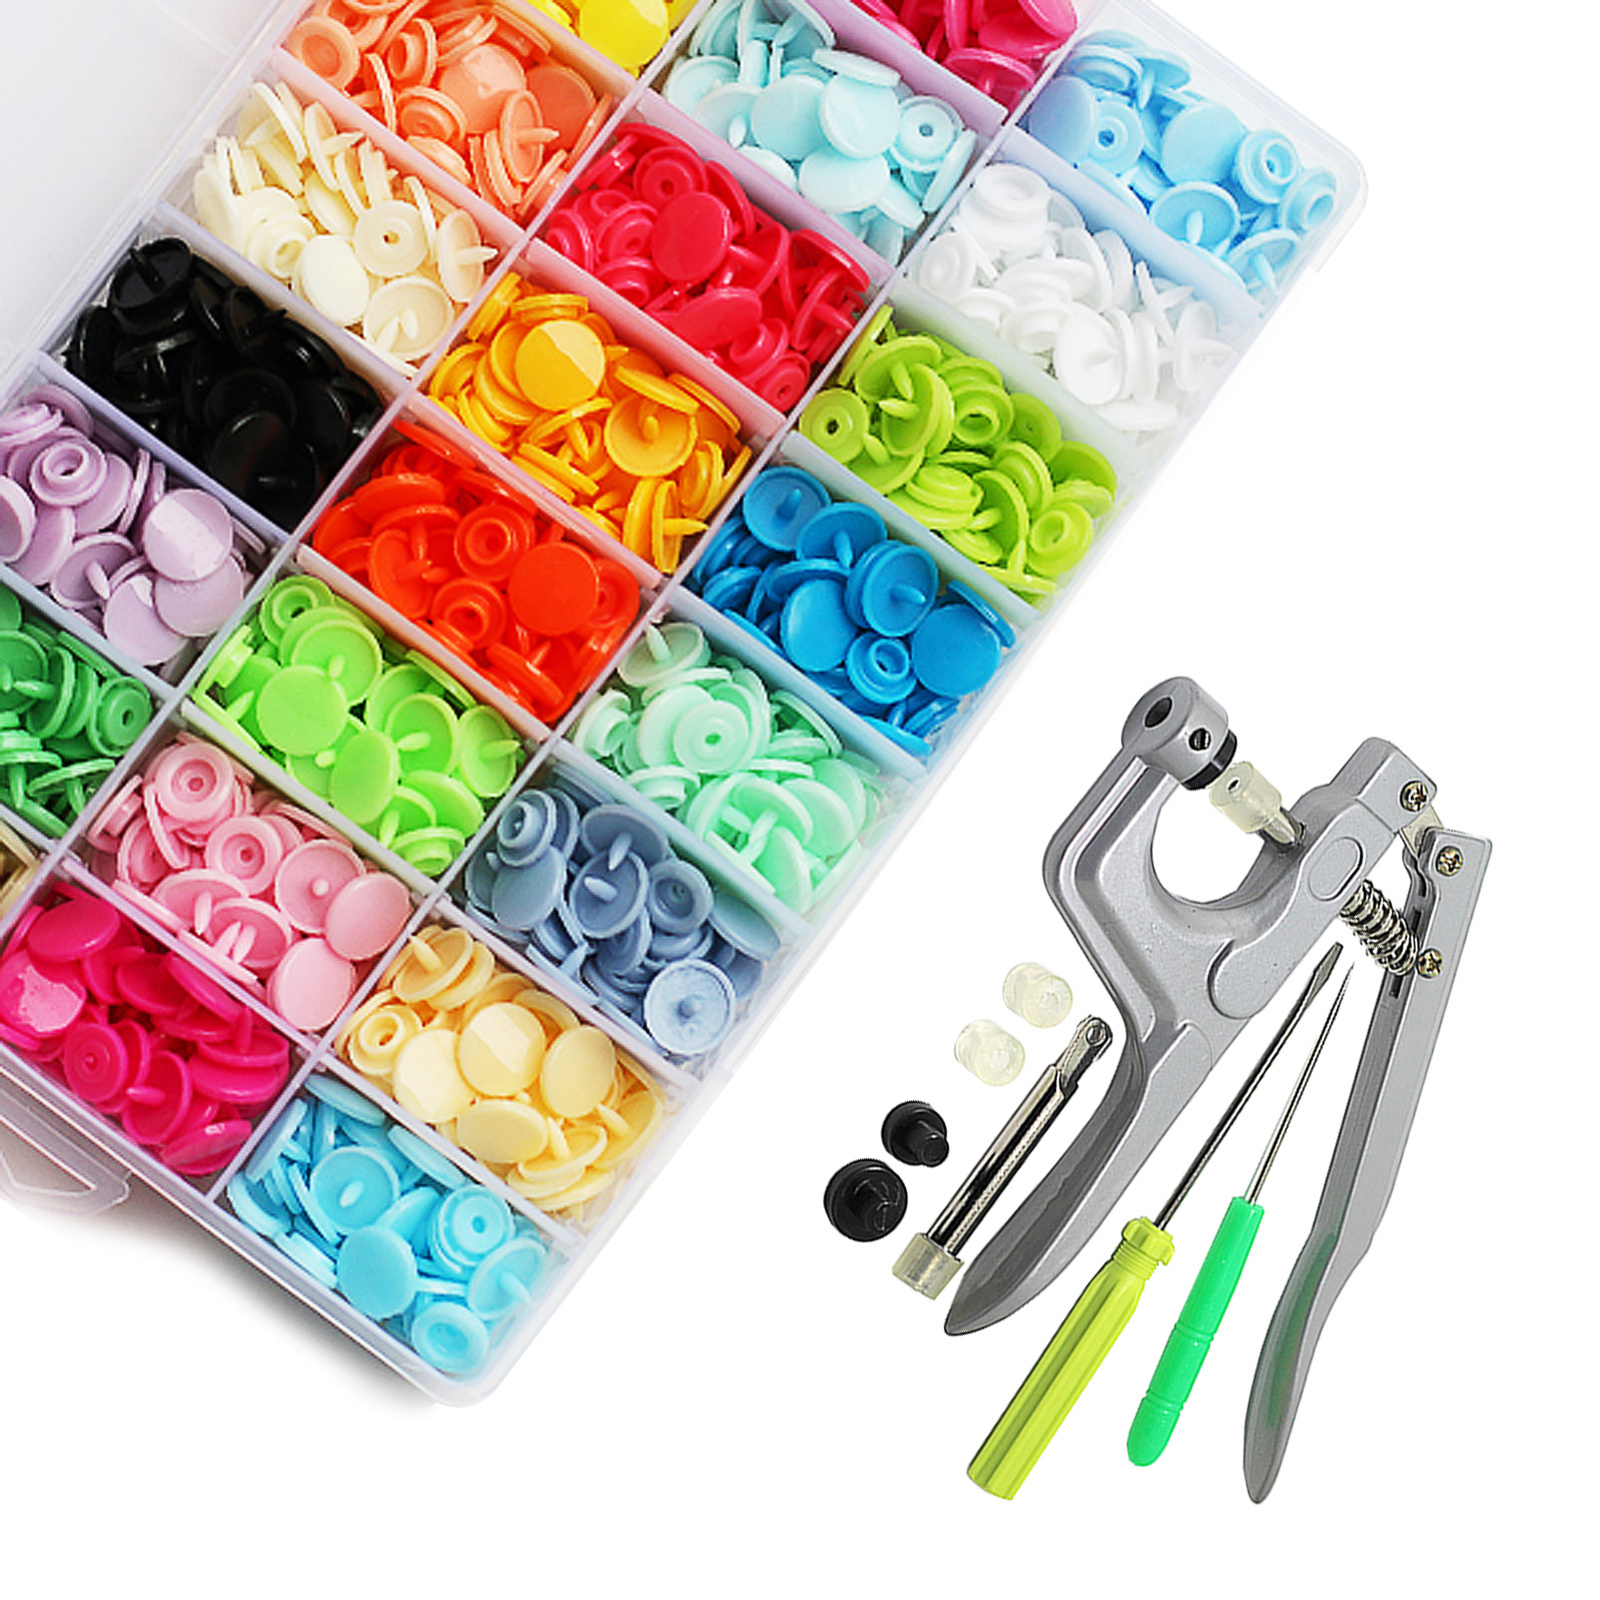 360PCS T5 24-Colors Snap Buttons Plastic Snaps With Snap Pliers For Sewing,  Snap Fasteners Kit For Sewing, Clothing, Crafting